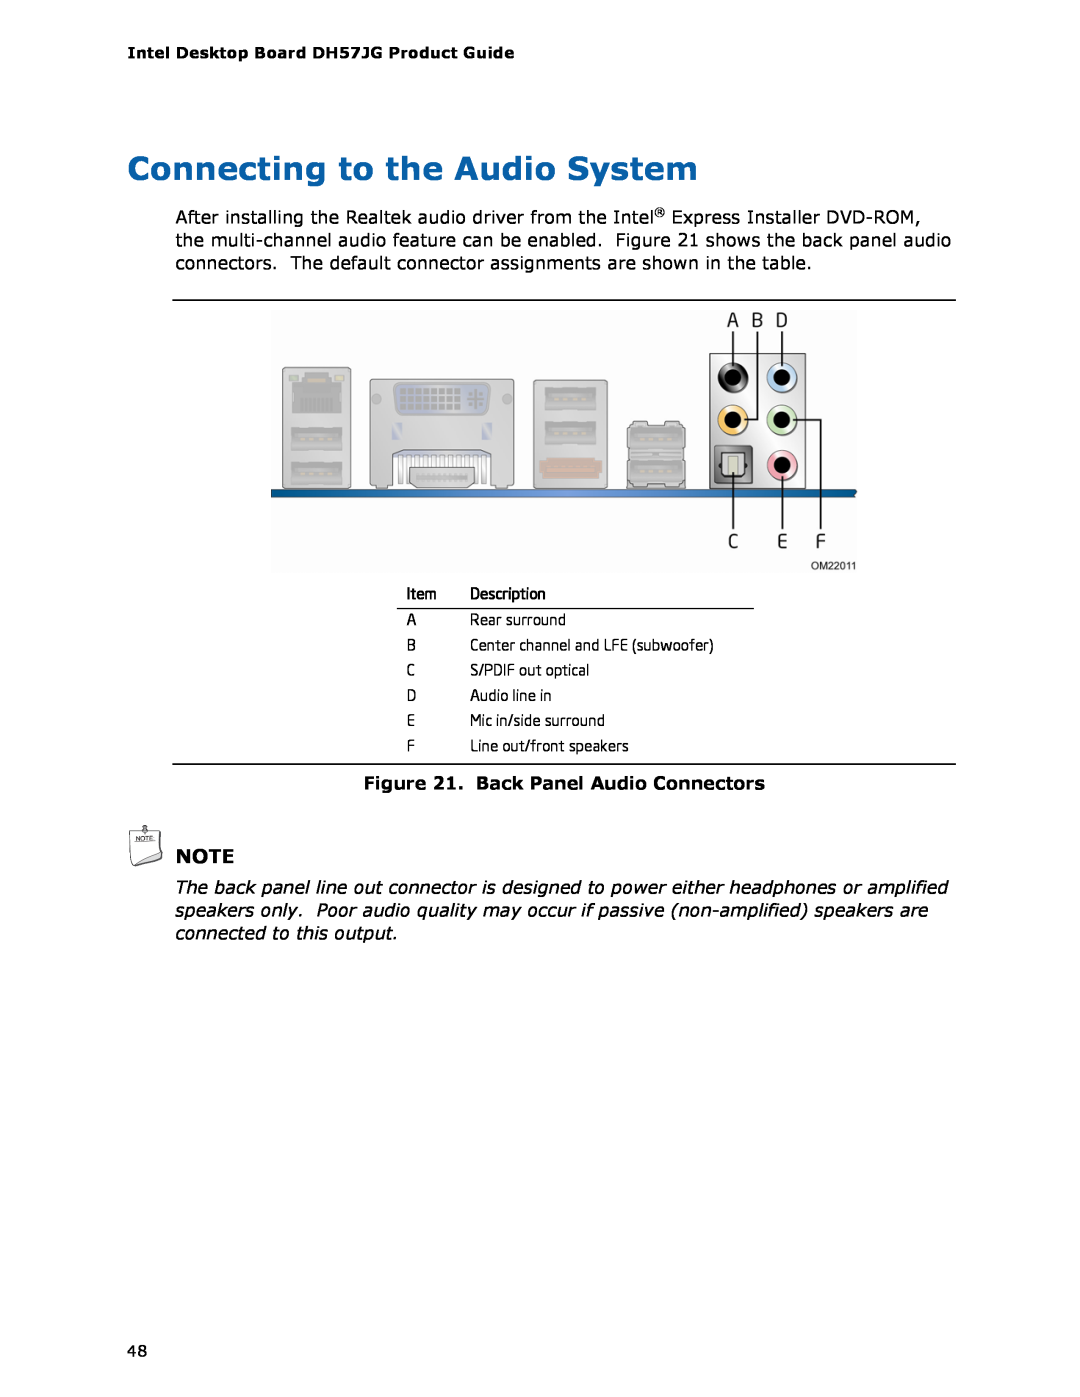 Intel BLKDH57JG manual Connecting to the Audio System, Back Panel Audio Connectors 